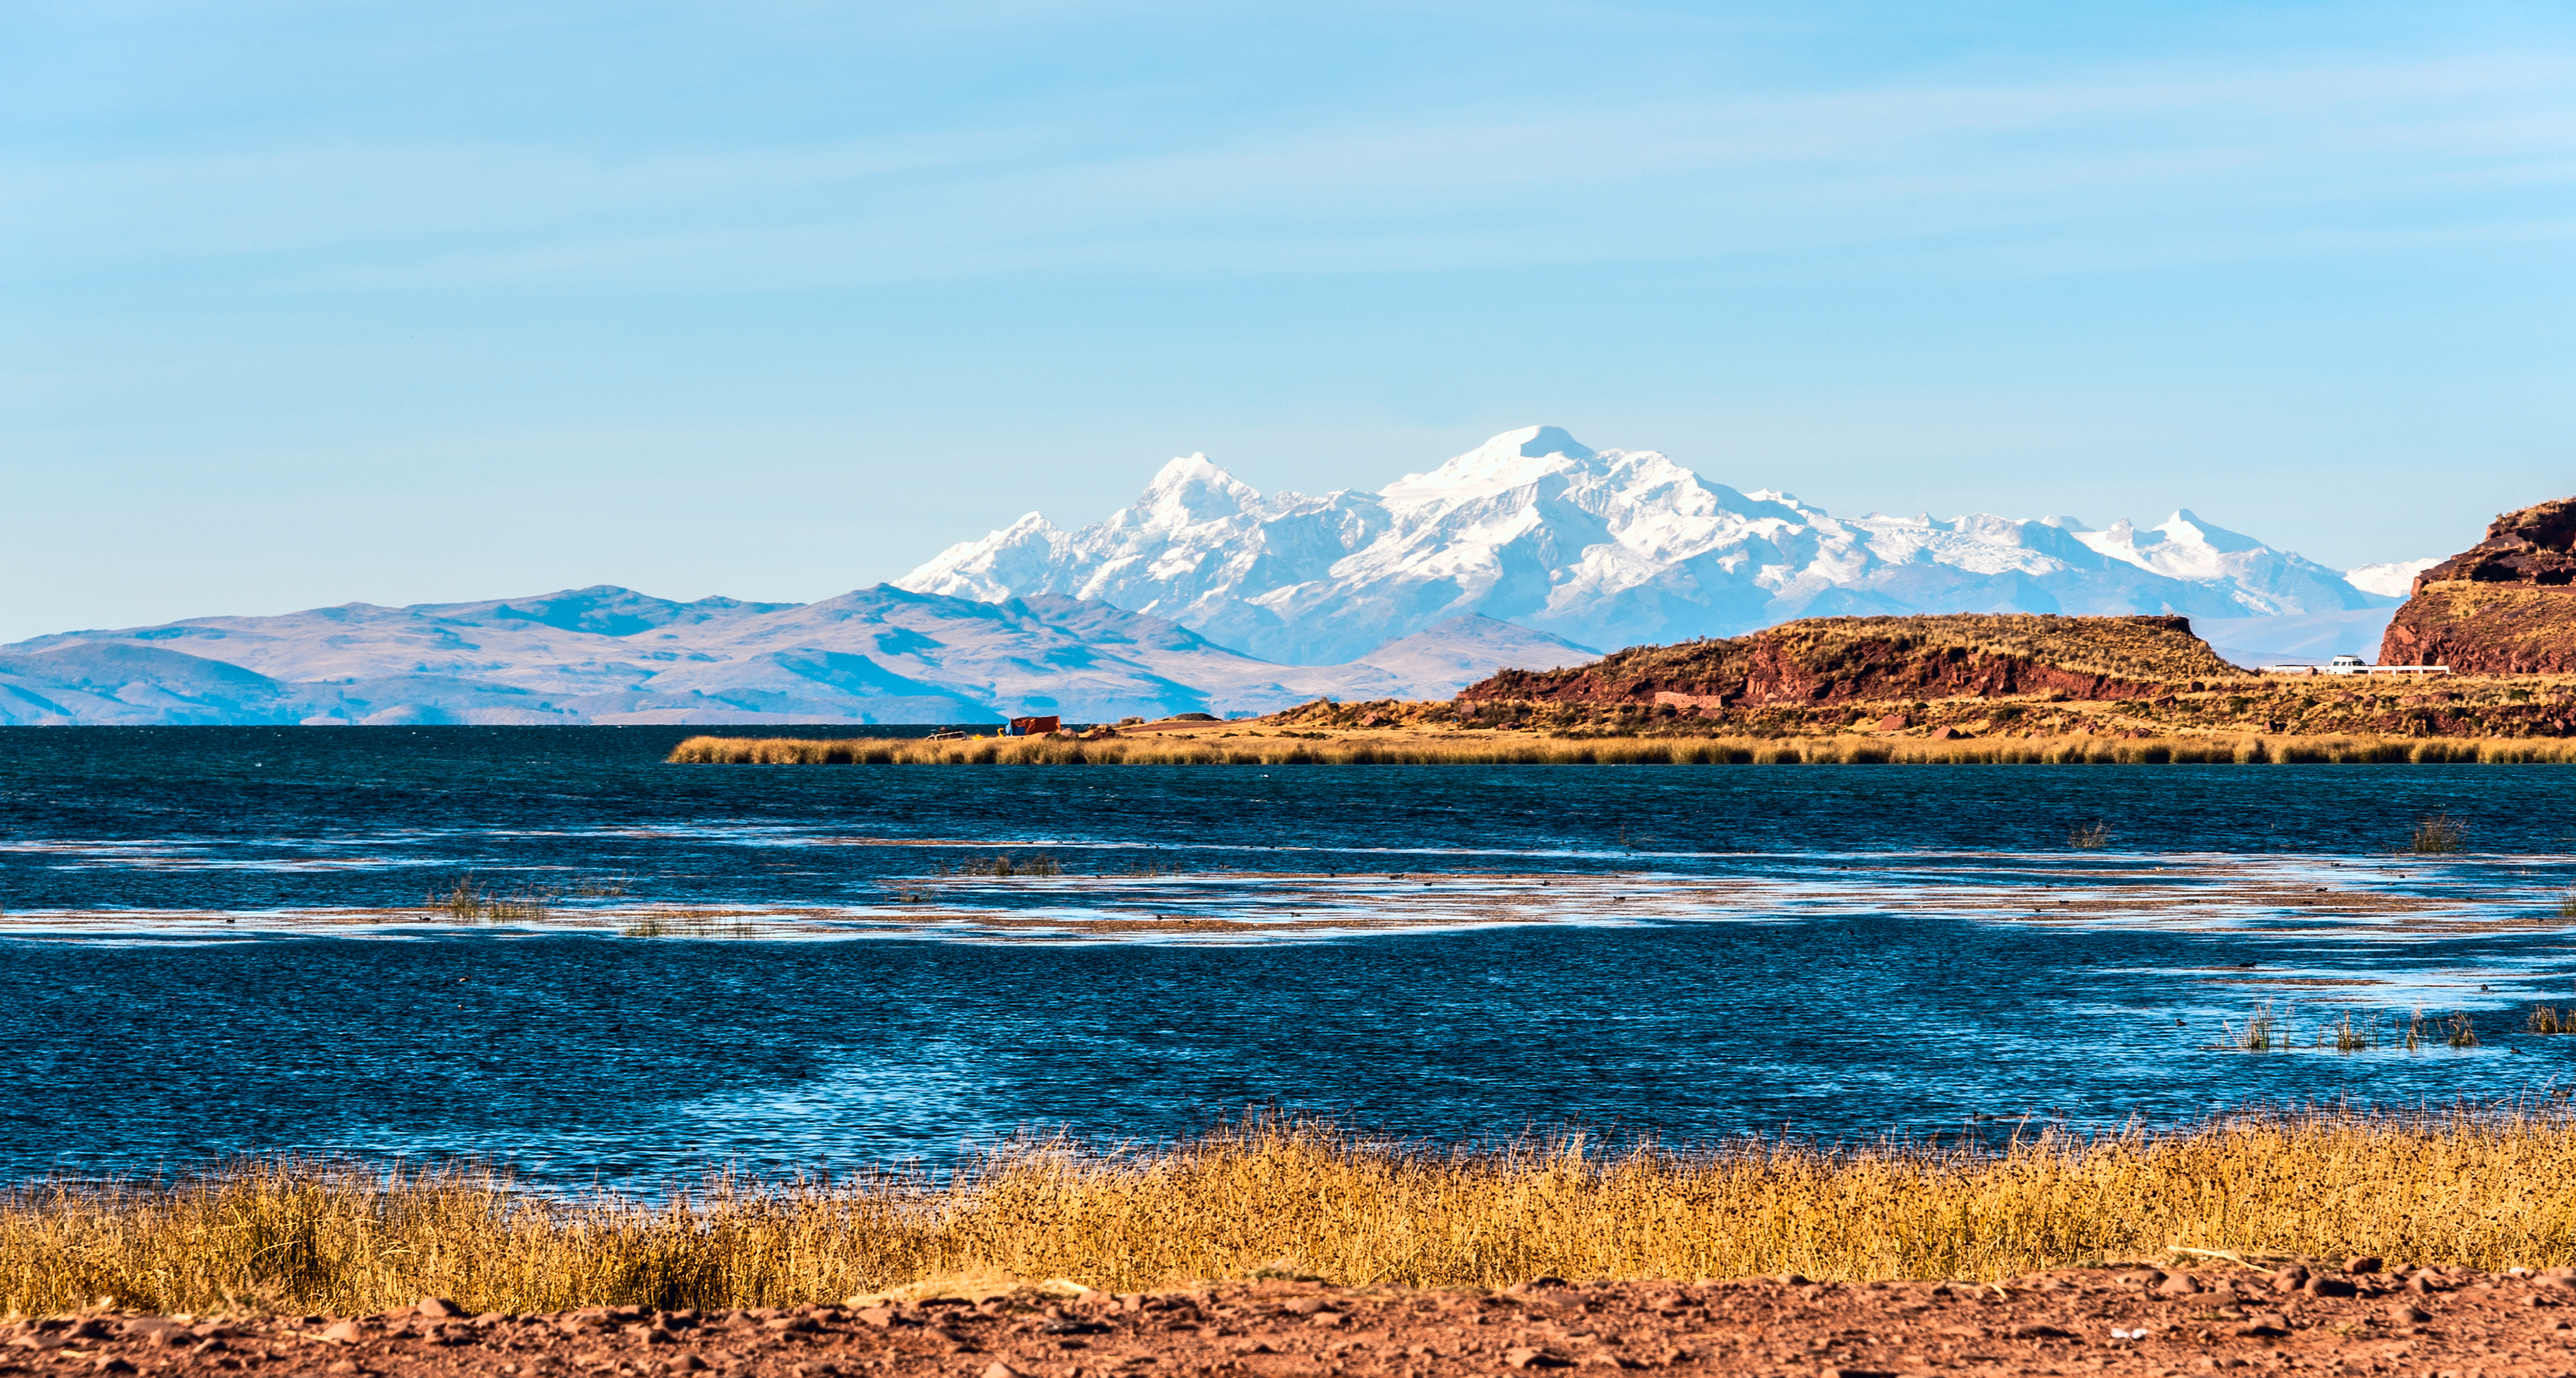 Lake Titicaca with sacred mountains